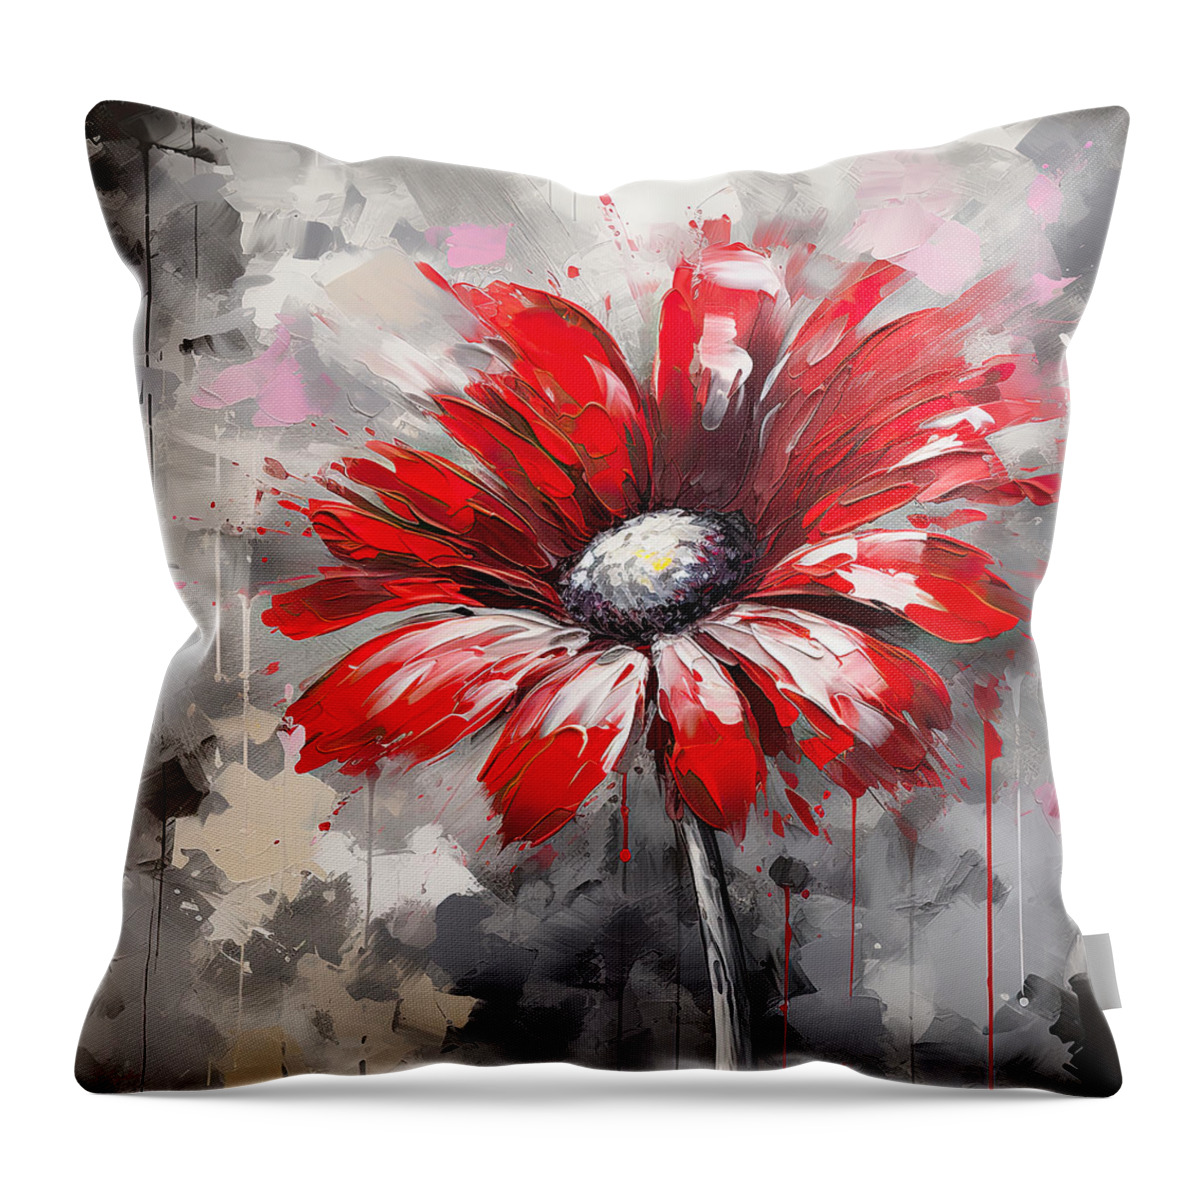 Red And Gray Art Throw Pillow featuring the digital art Red Gerbera Daisy in Impressionist Style - Red Art by Lourry Legarde